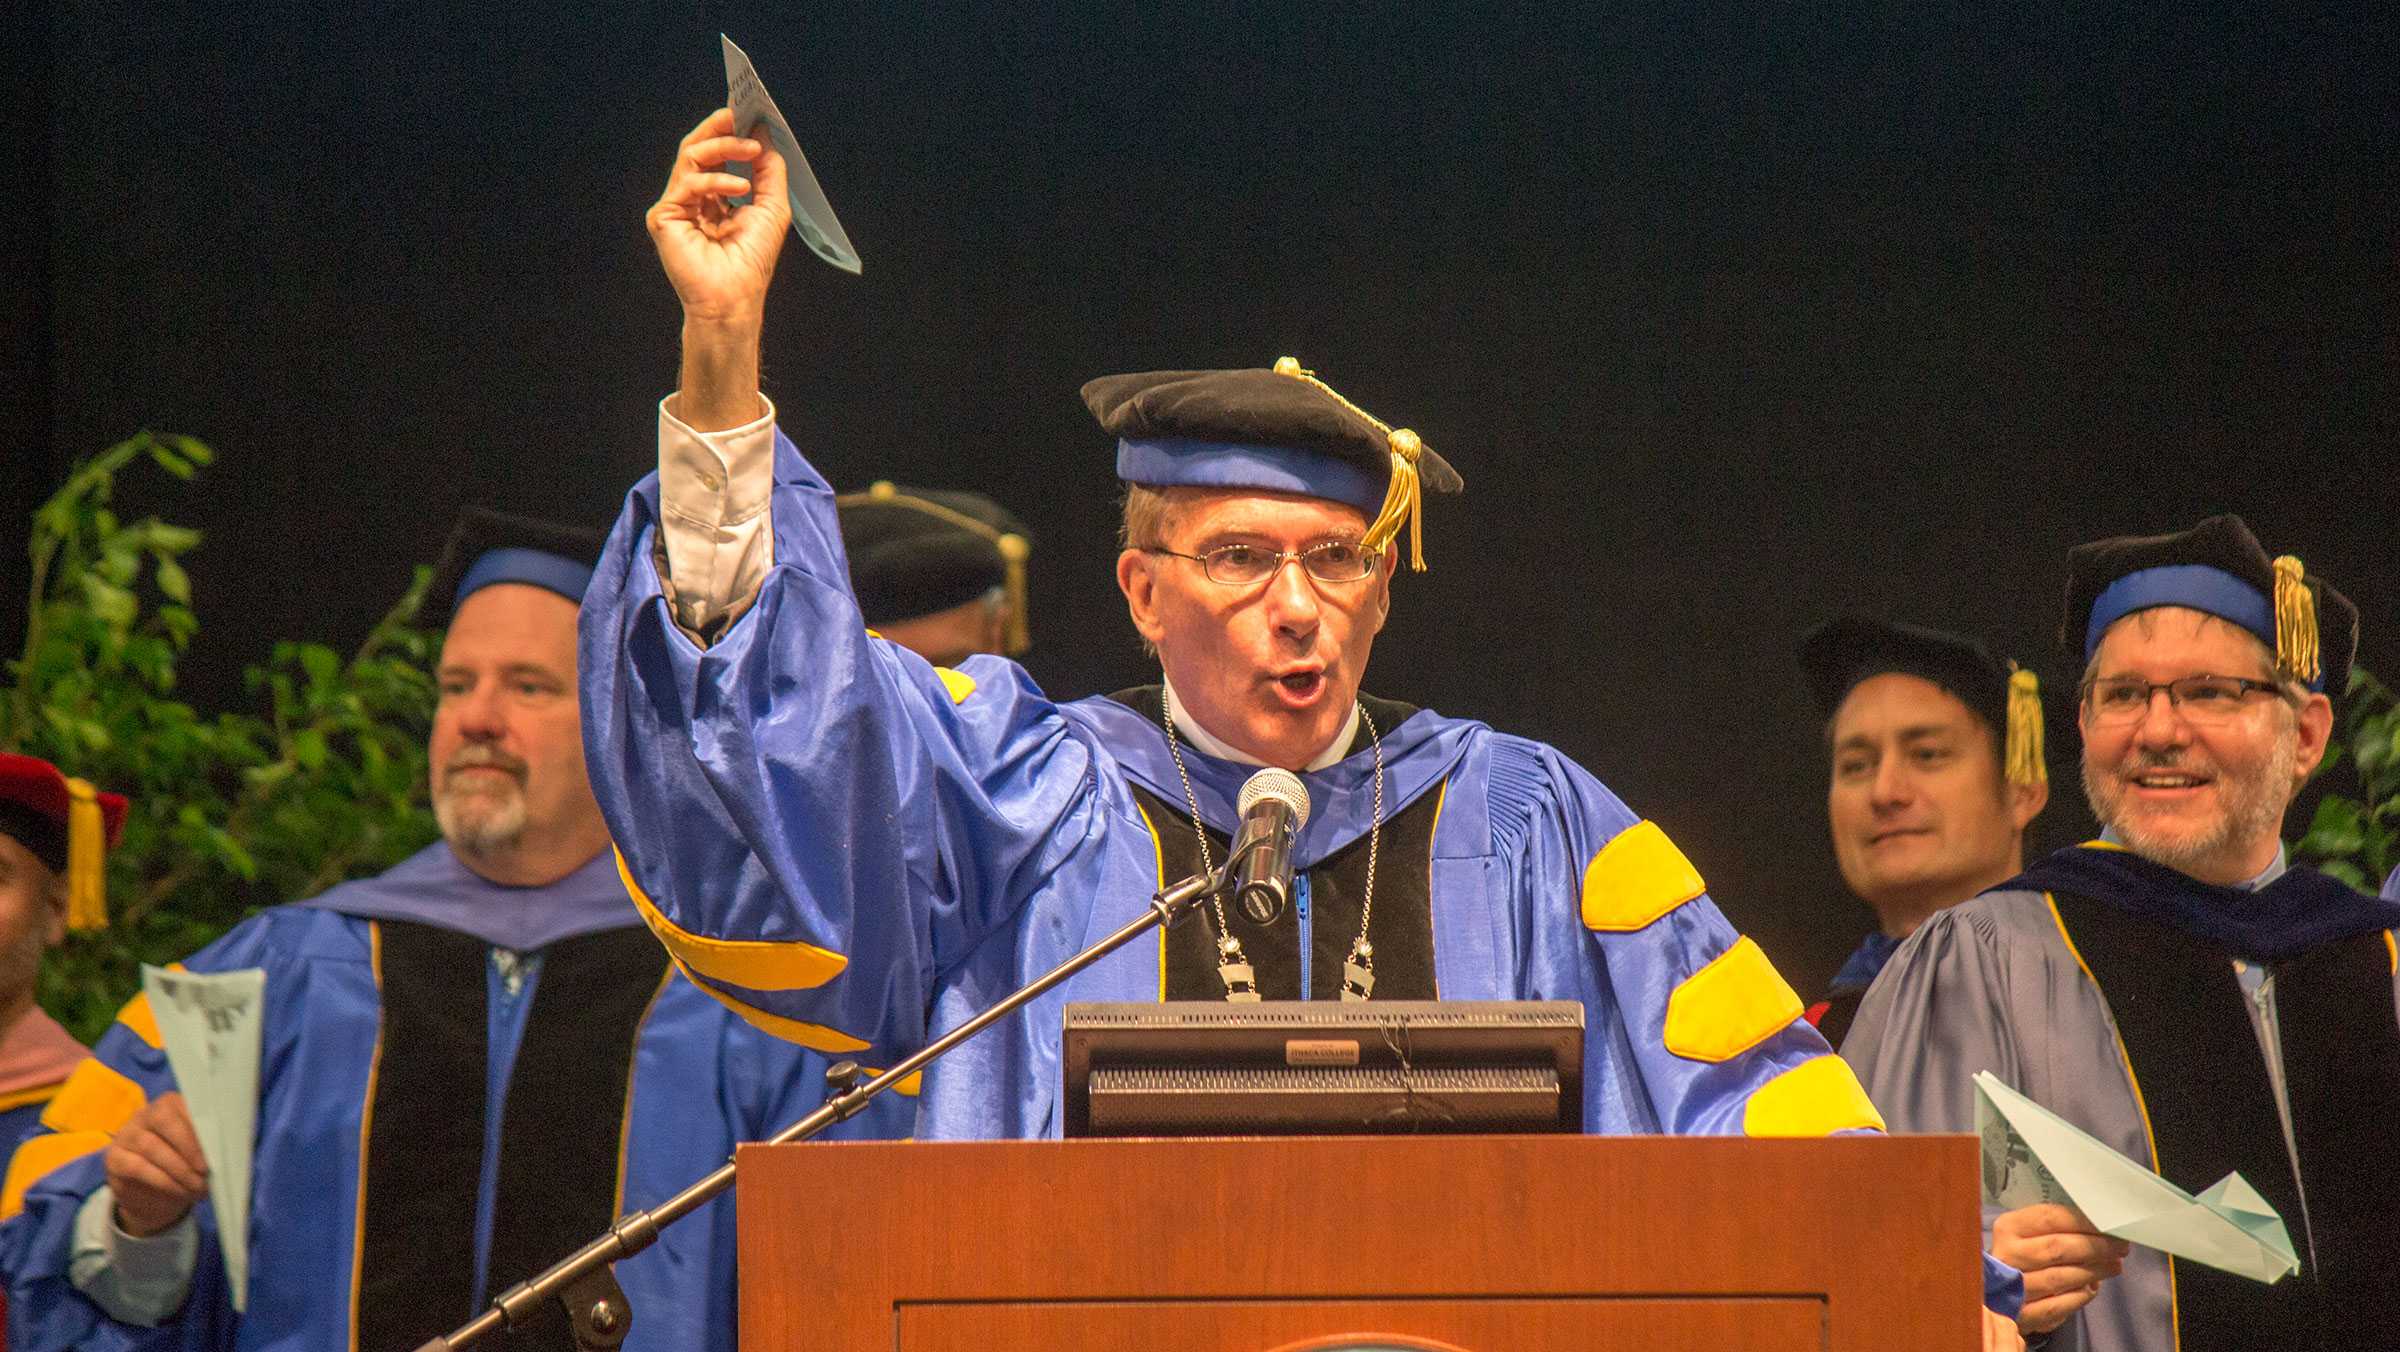 Ithaca College welcomes Class of 2019 at Convocation